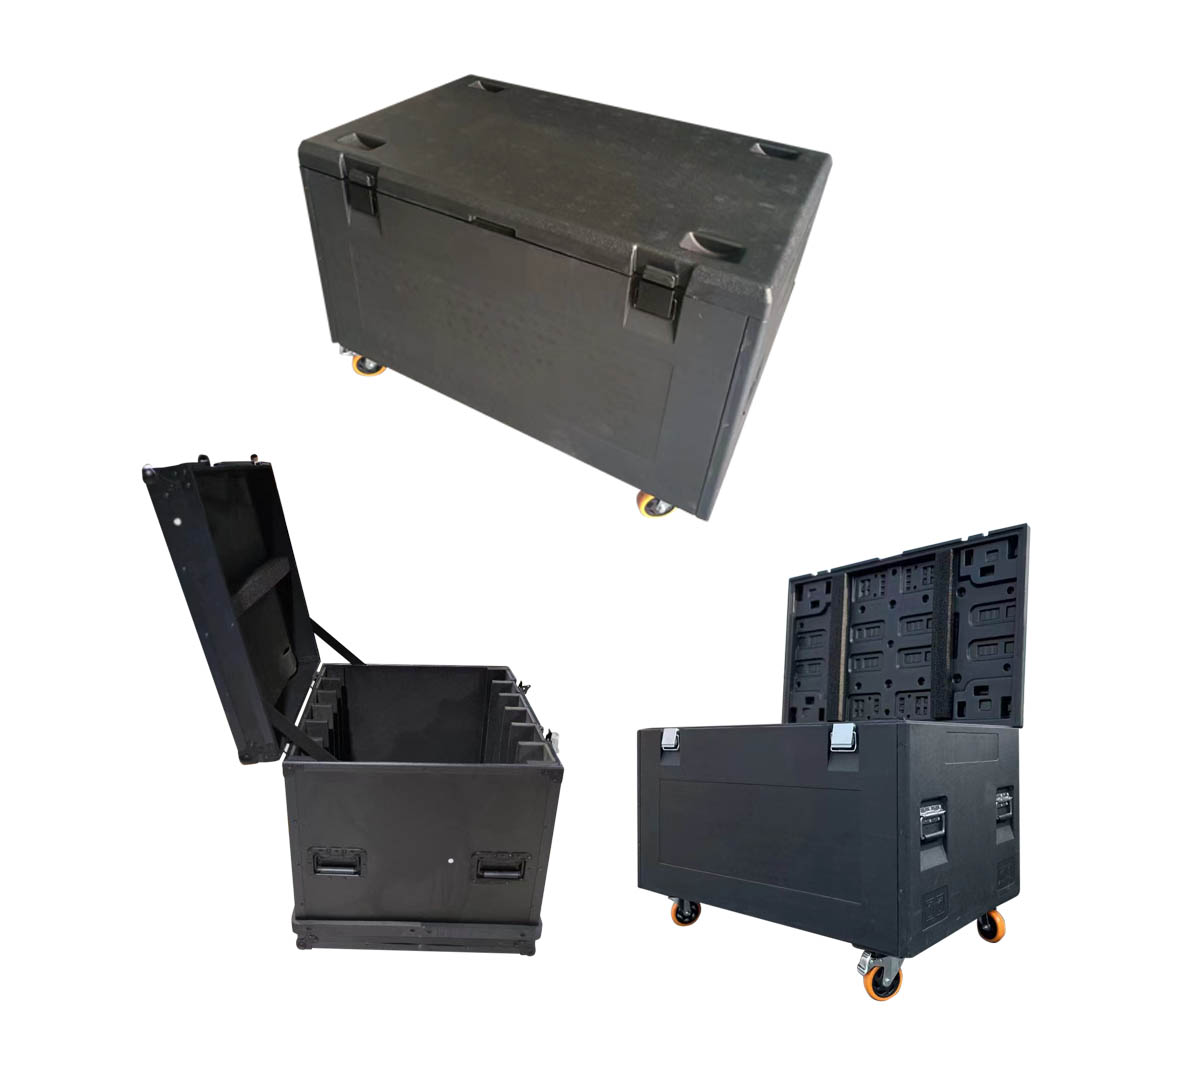 Plastic LED Flight Cases in put 8 pcs 500X500mm cabinetLED Rental Display 500 Cabinet  8 in 1 Plastic Carrying CaseLED Rental Display 500 Cabinet  8 in 1 Plastic Carrying CaseLED Rental Display 500 Cabinet  6 in 1 Plastic Carrying CaseLED Rental Display 500 Cabinet  6 in 1 Plastic Carrying Case